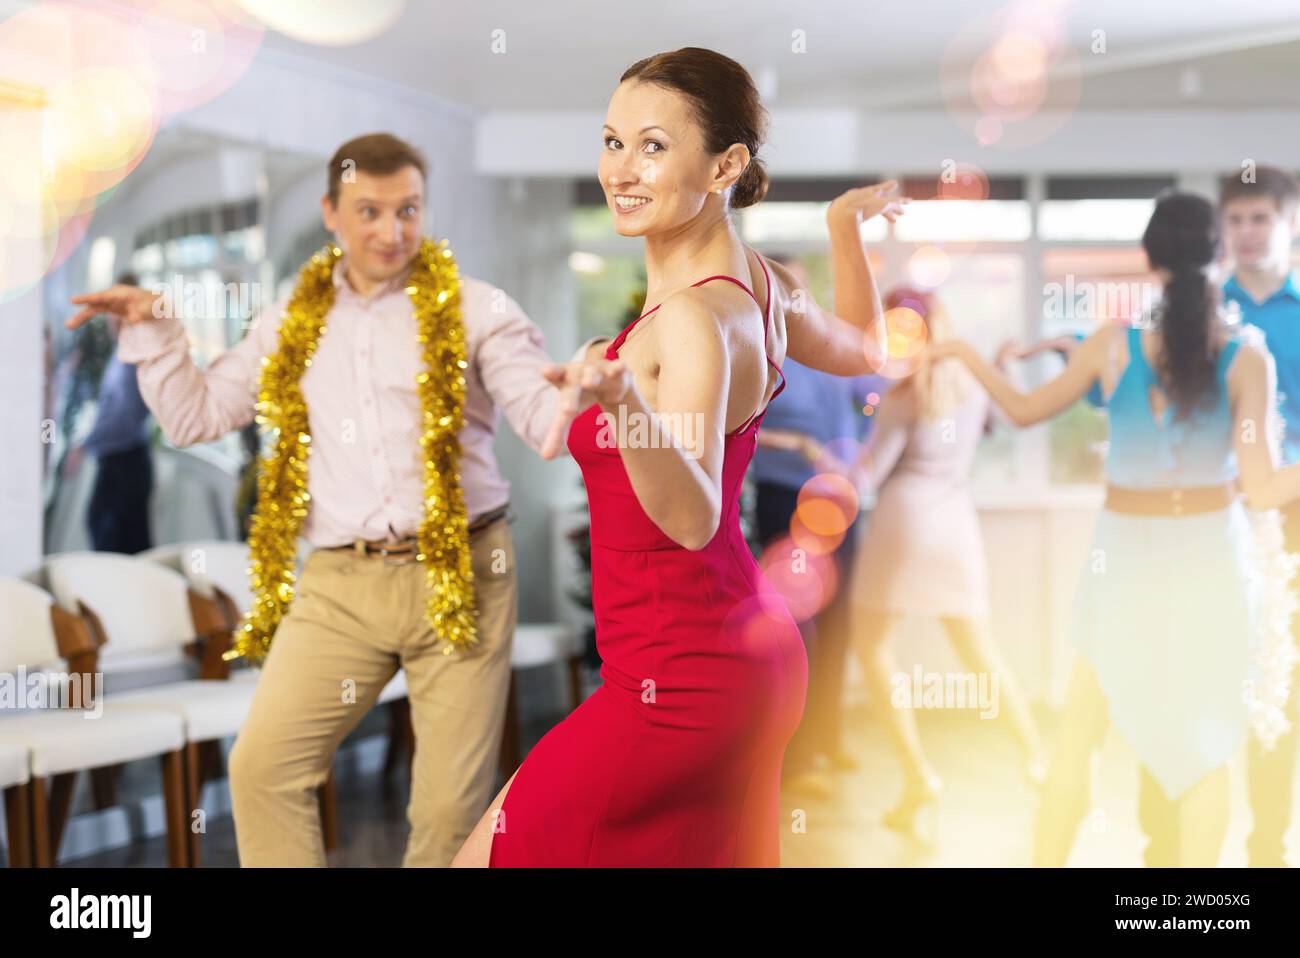 Paso doble dance during Christmas or New Year celebrations in dance studio Stock Photo